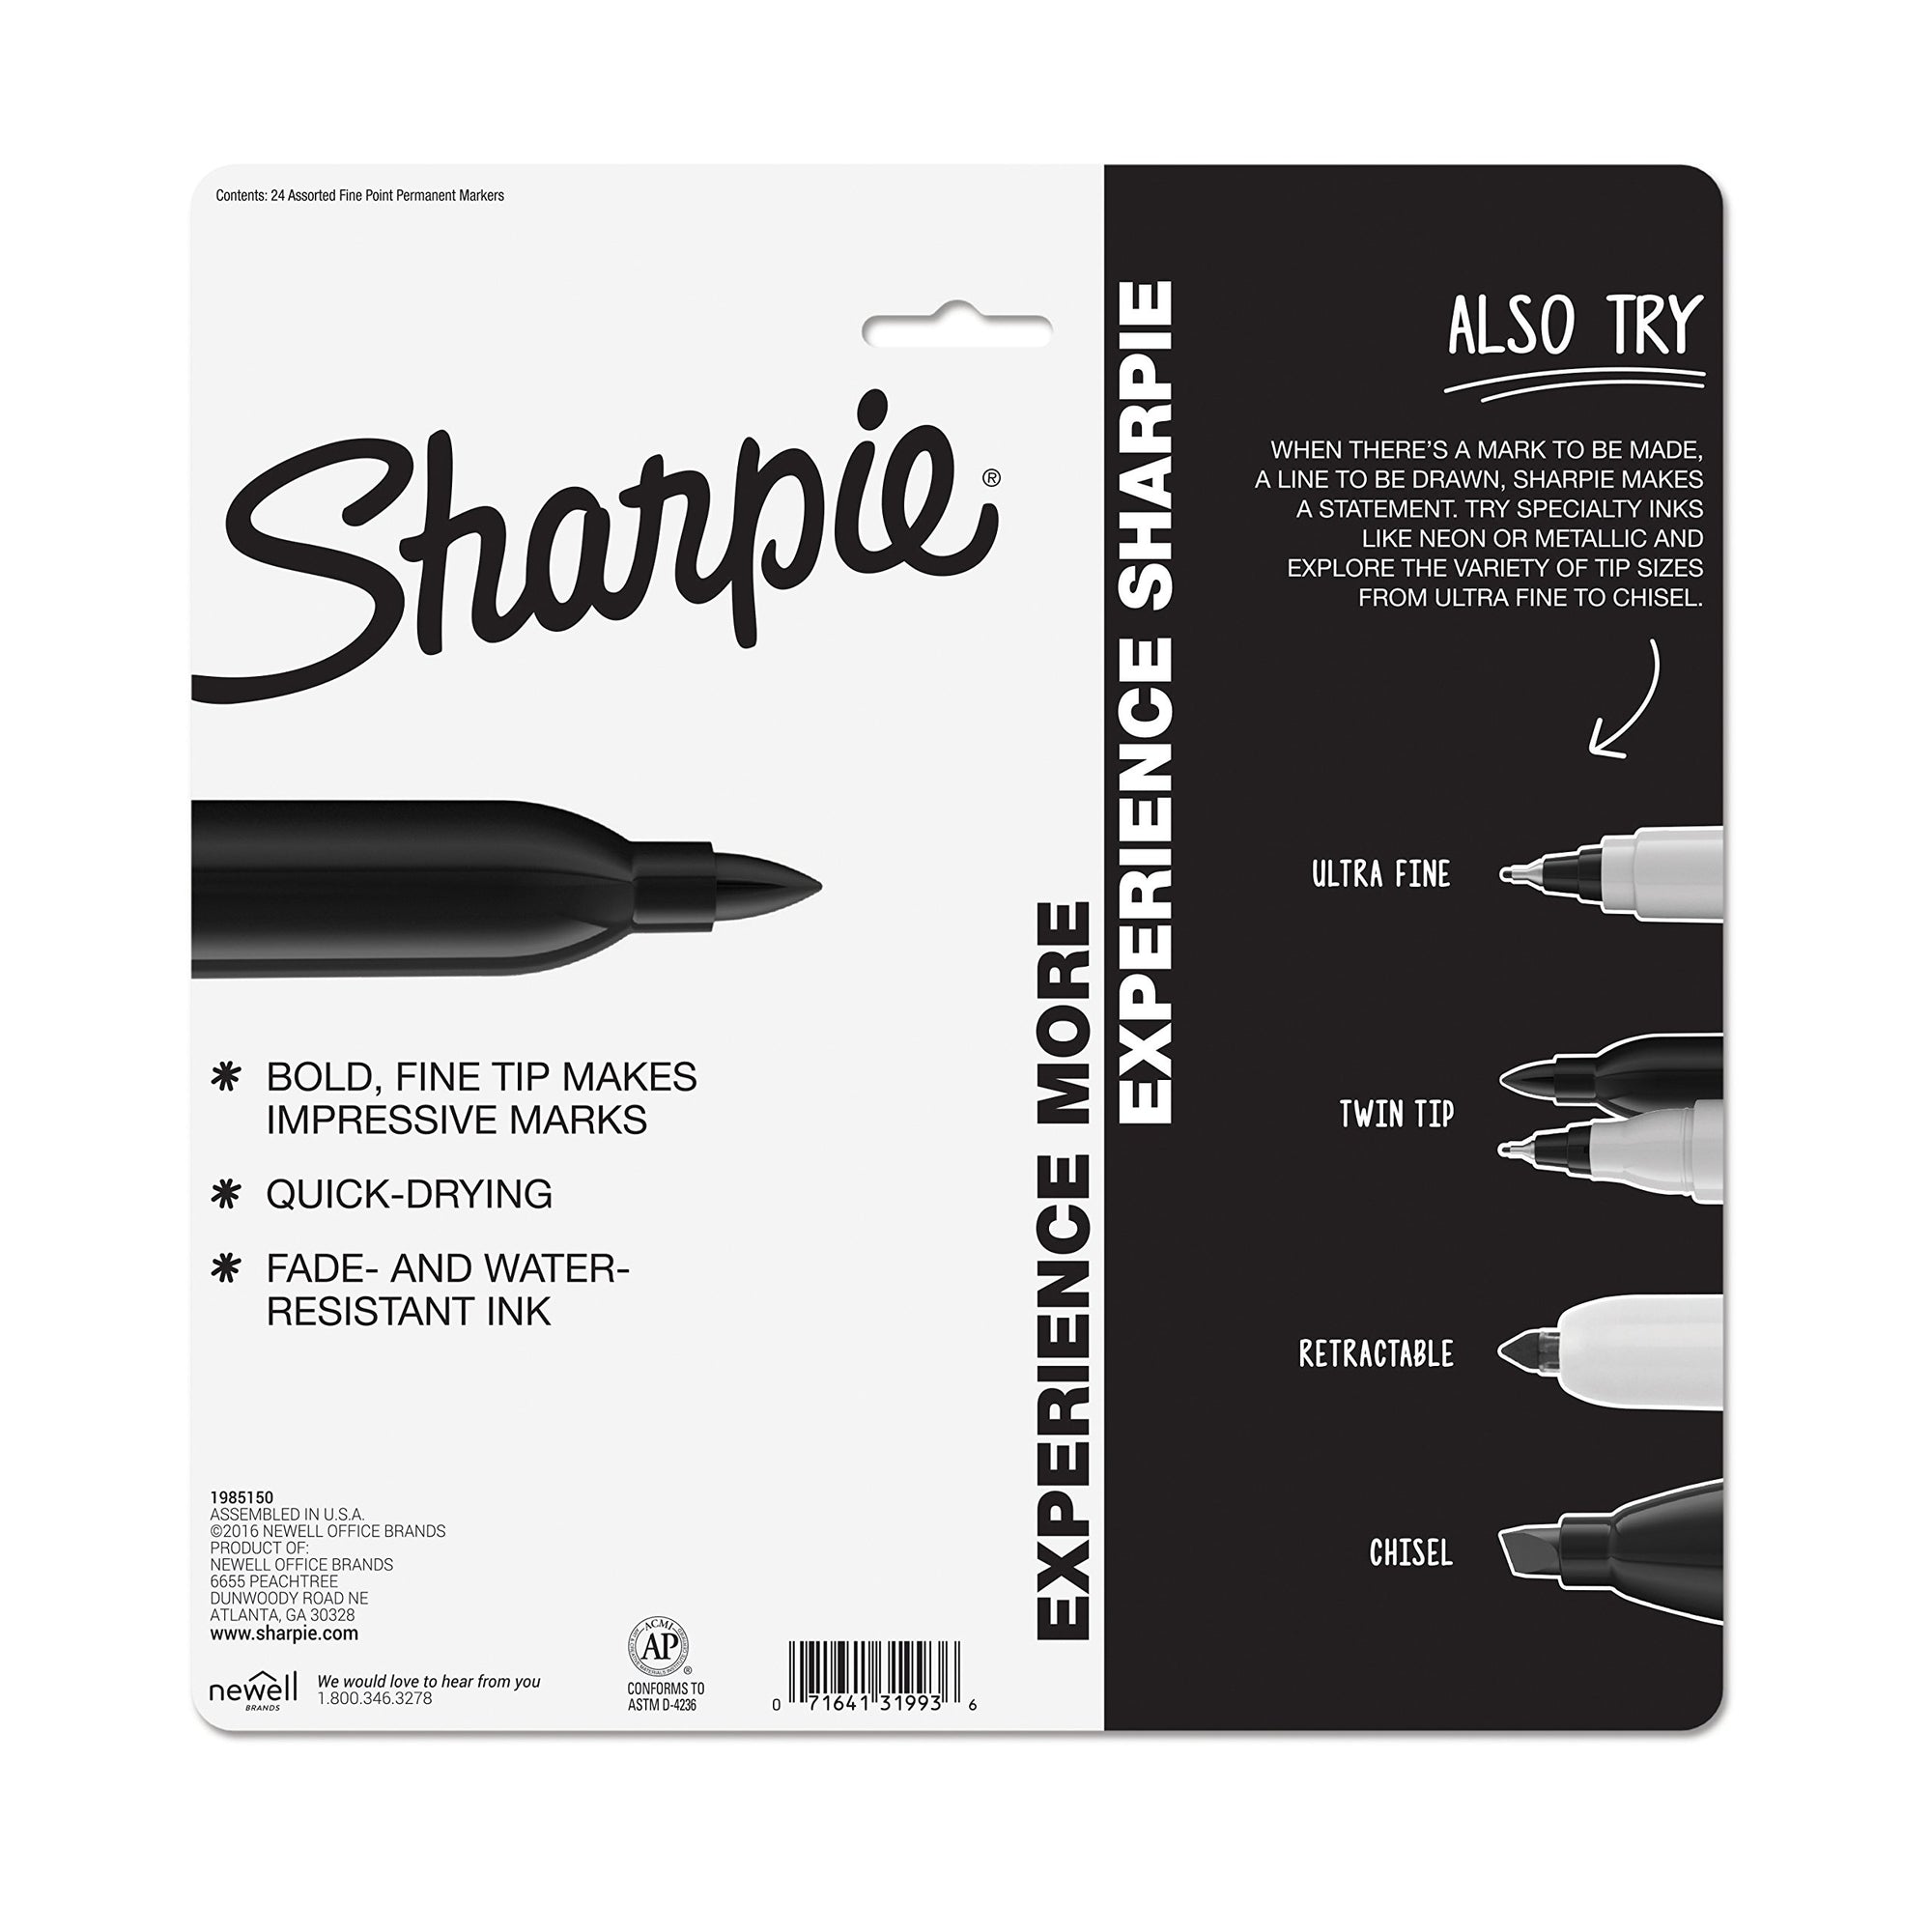 SHARPIE Electro Pop Permanent Markers, Fine Point, Assorted Colors